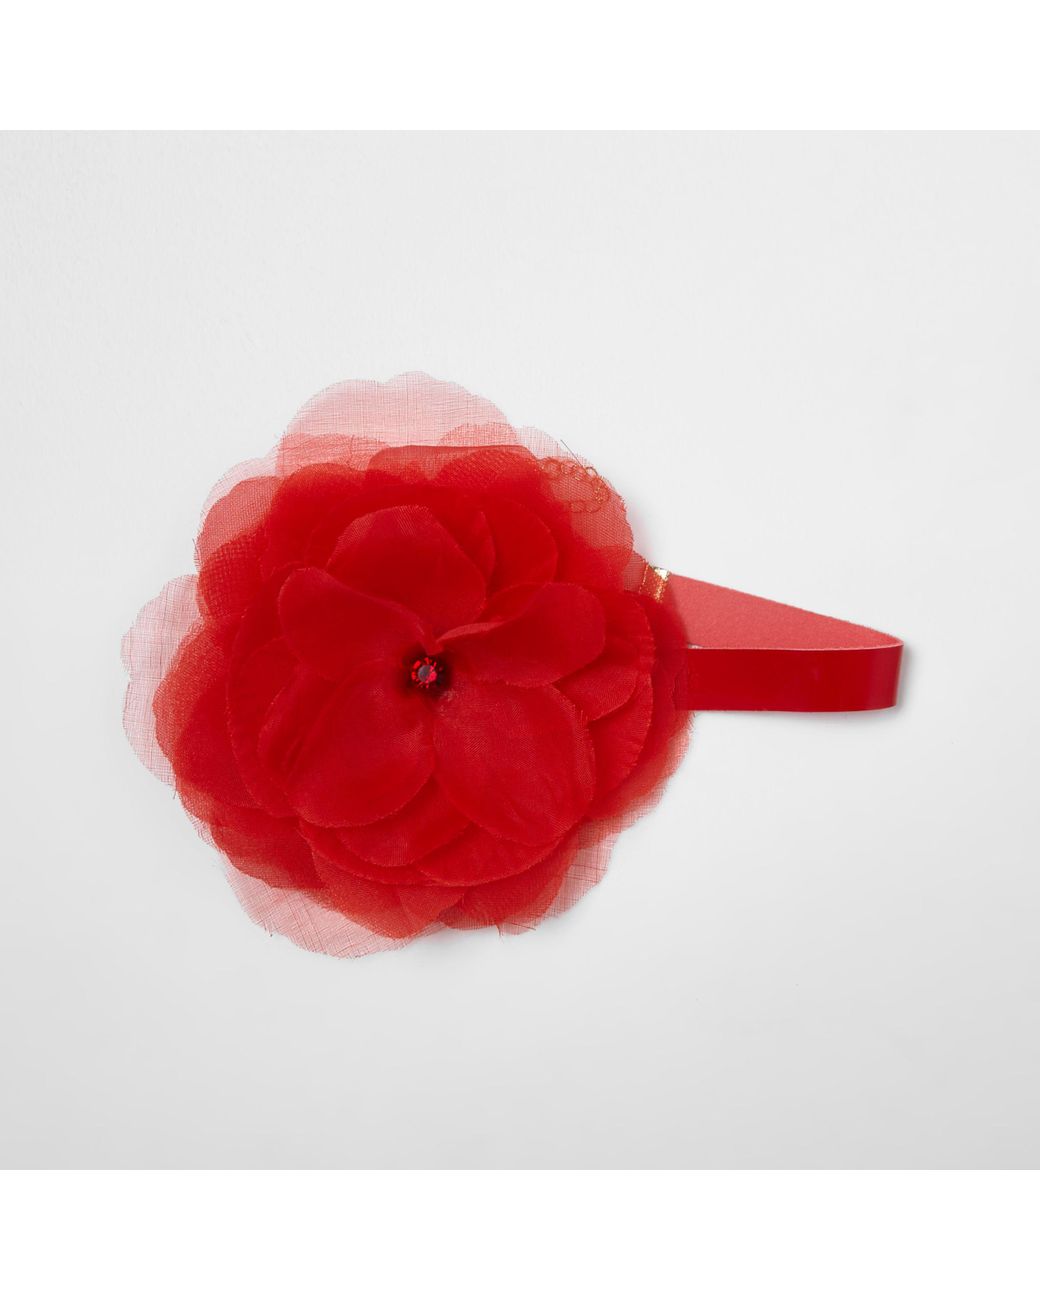 River Island Red Oversized Flower Corsage Choker | Lyst